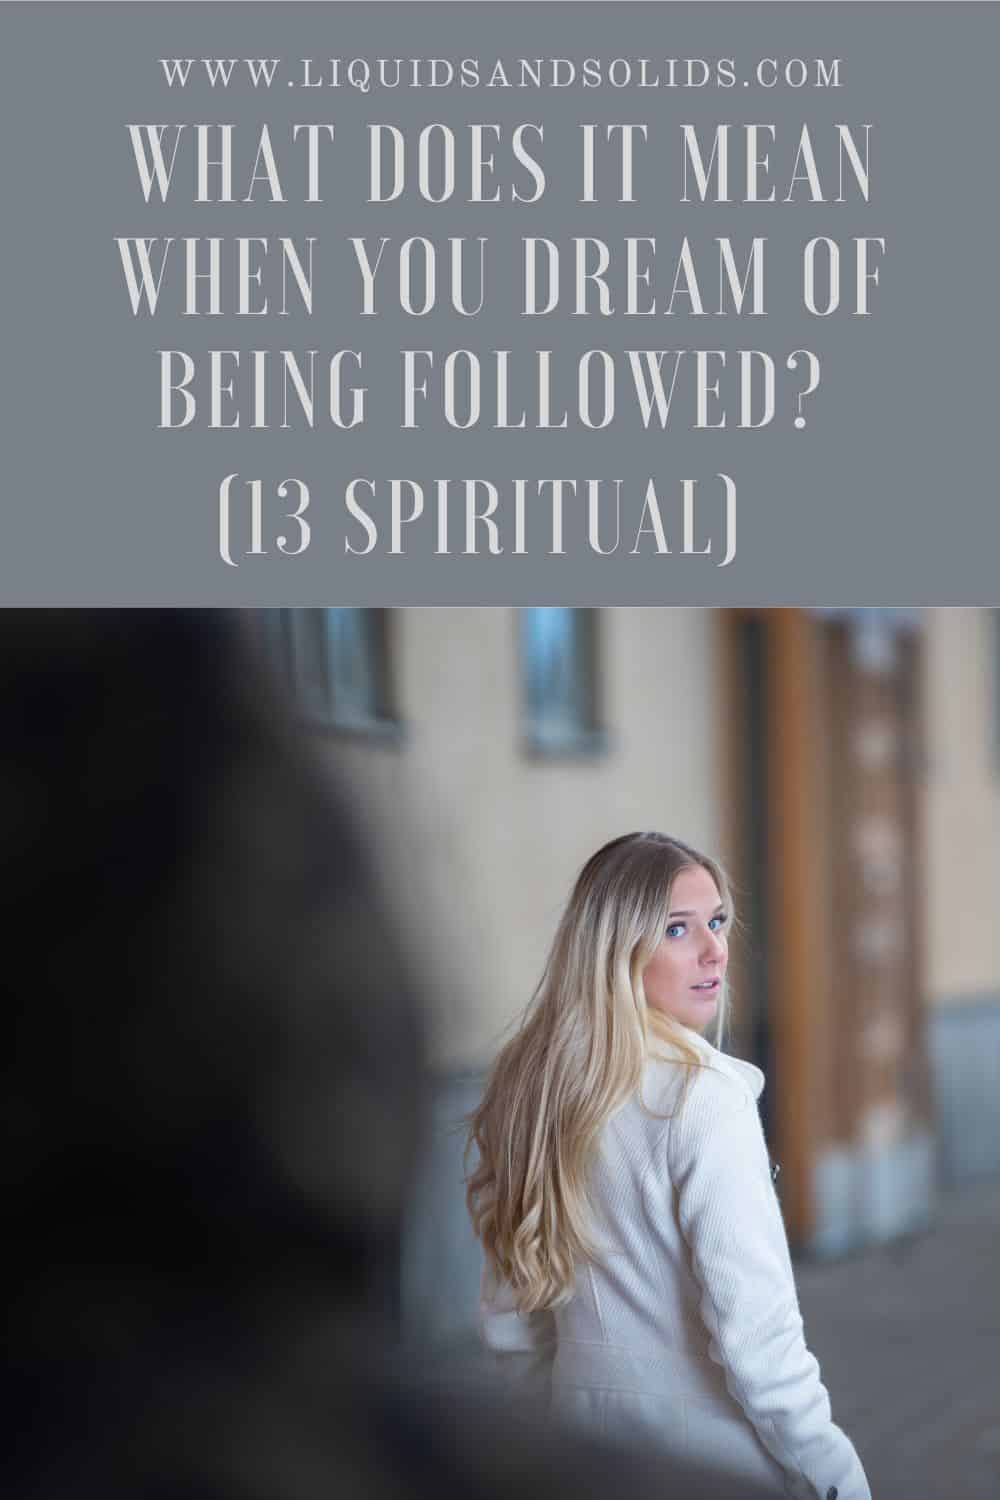 What Does It Mean When You Dream Of Being Followed (13 Spiritual)